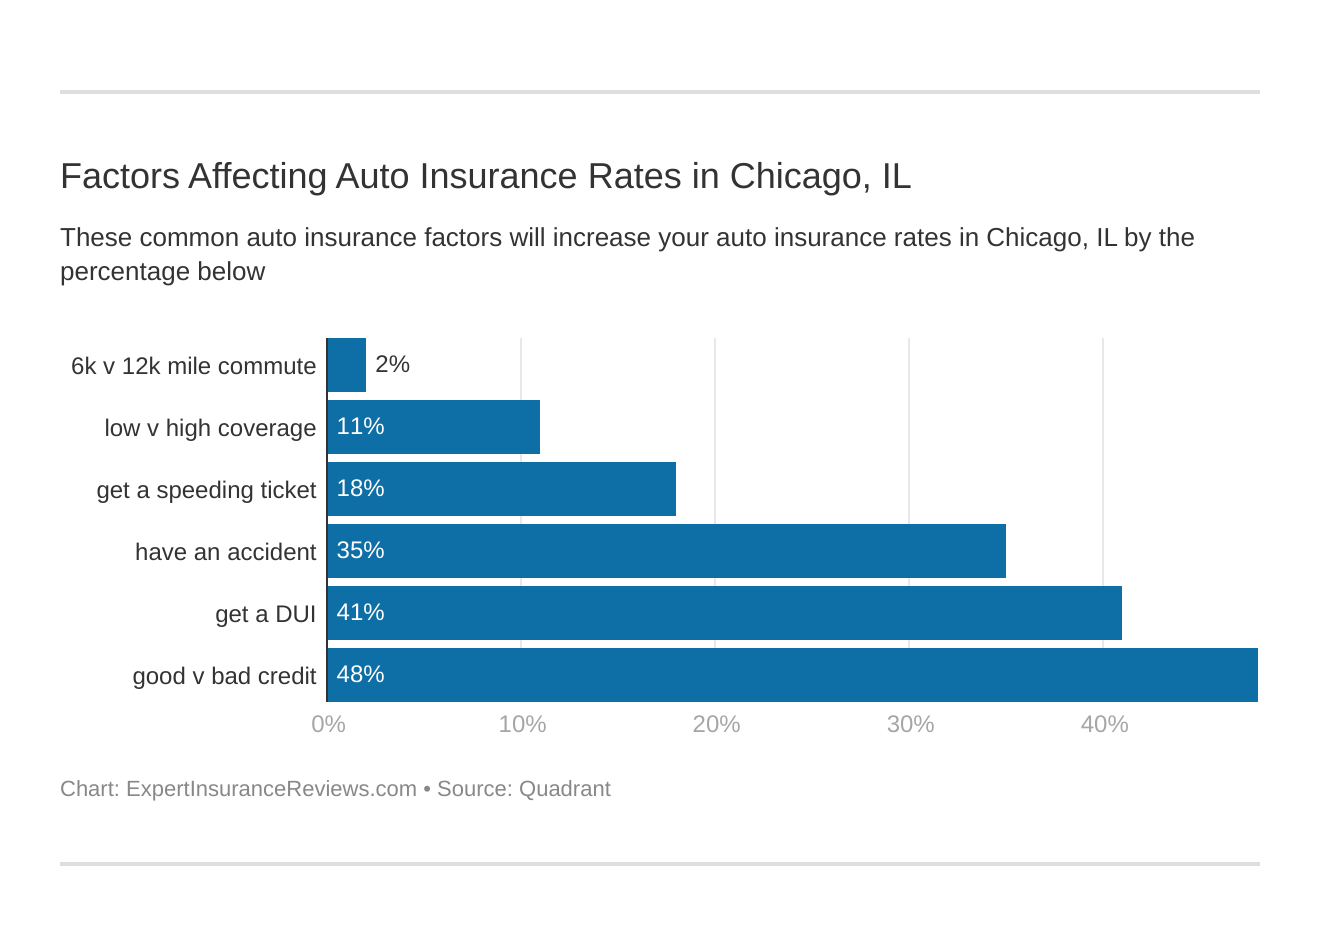 Factors Affecting Auto Insurance Rates in Chicago, IL